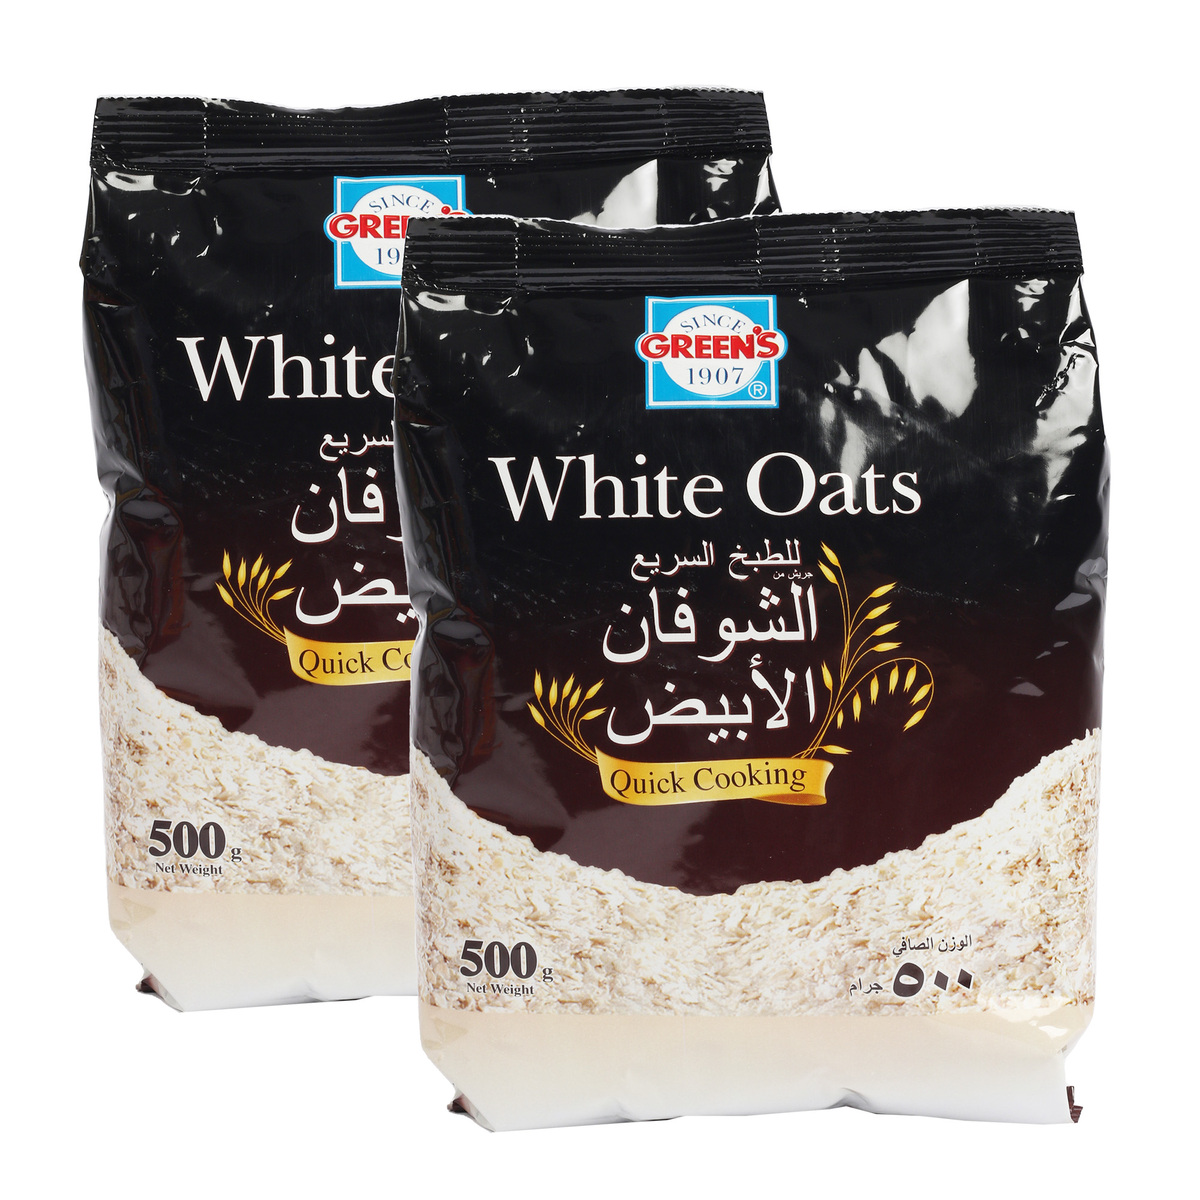 Green's White Oats Pouch Value Pack 2 x 500 g